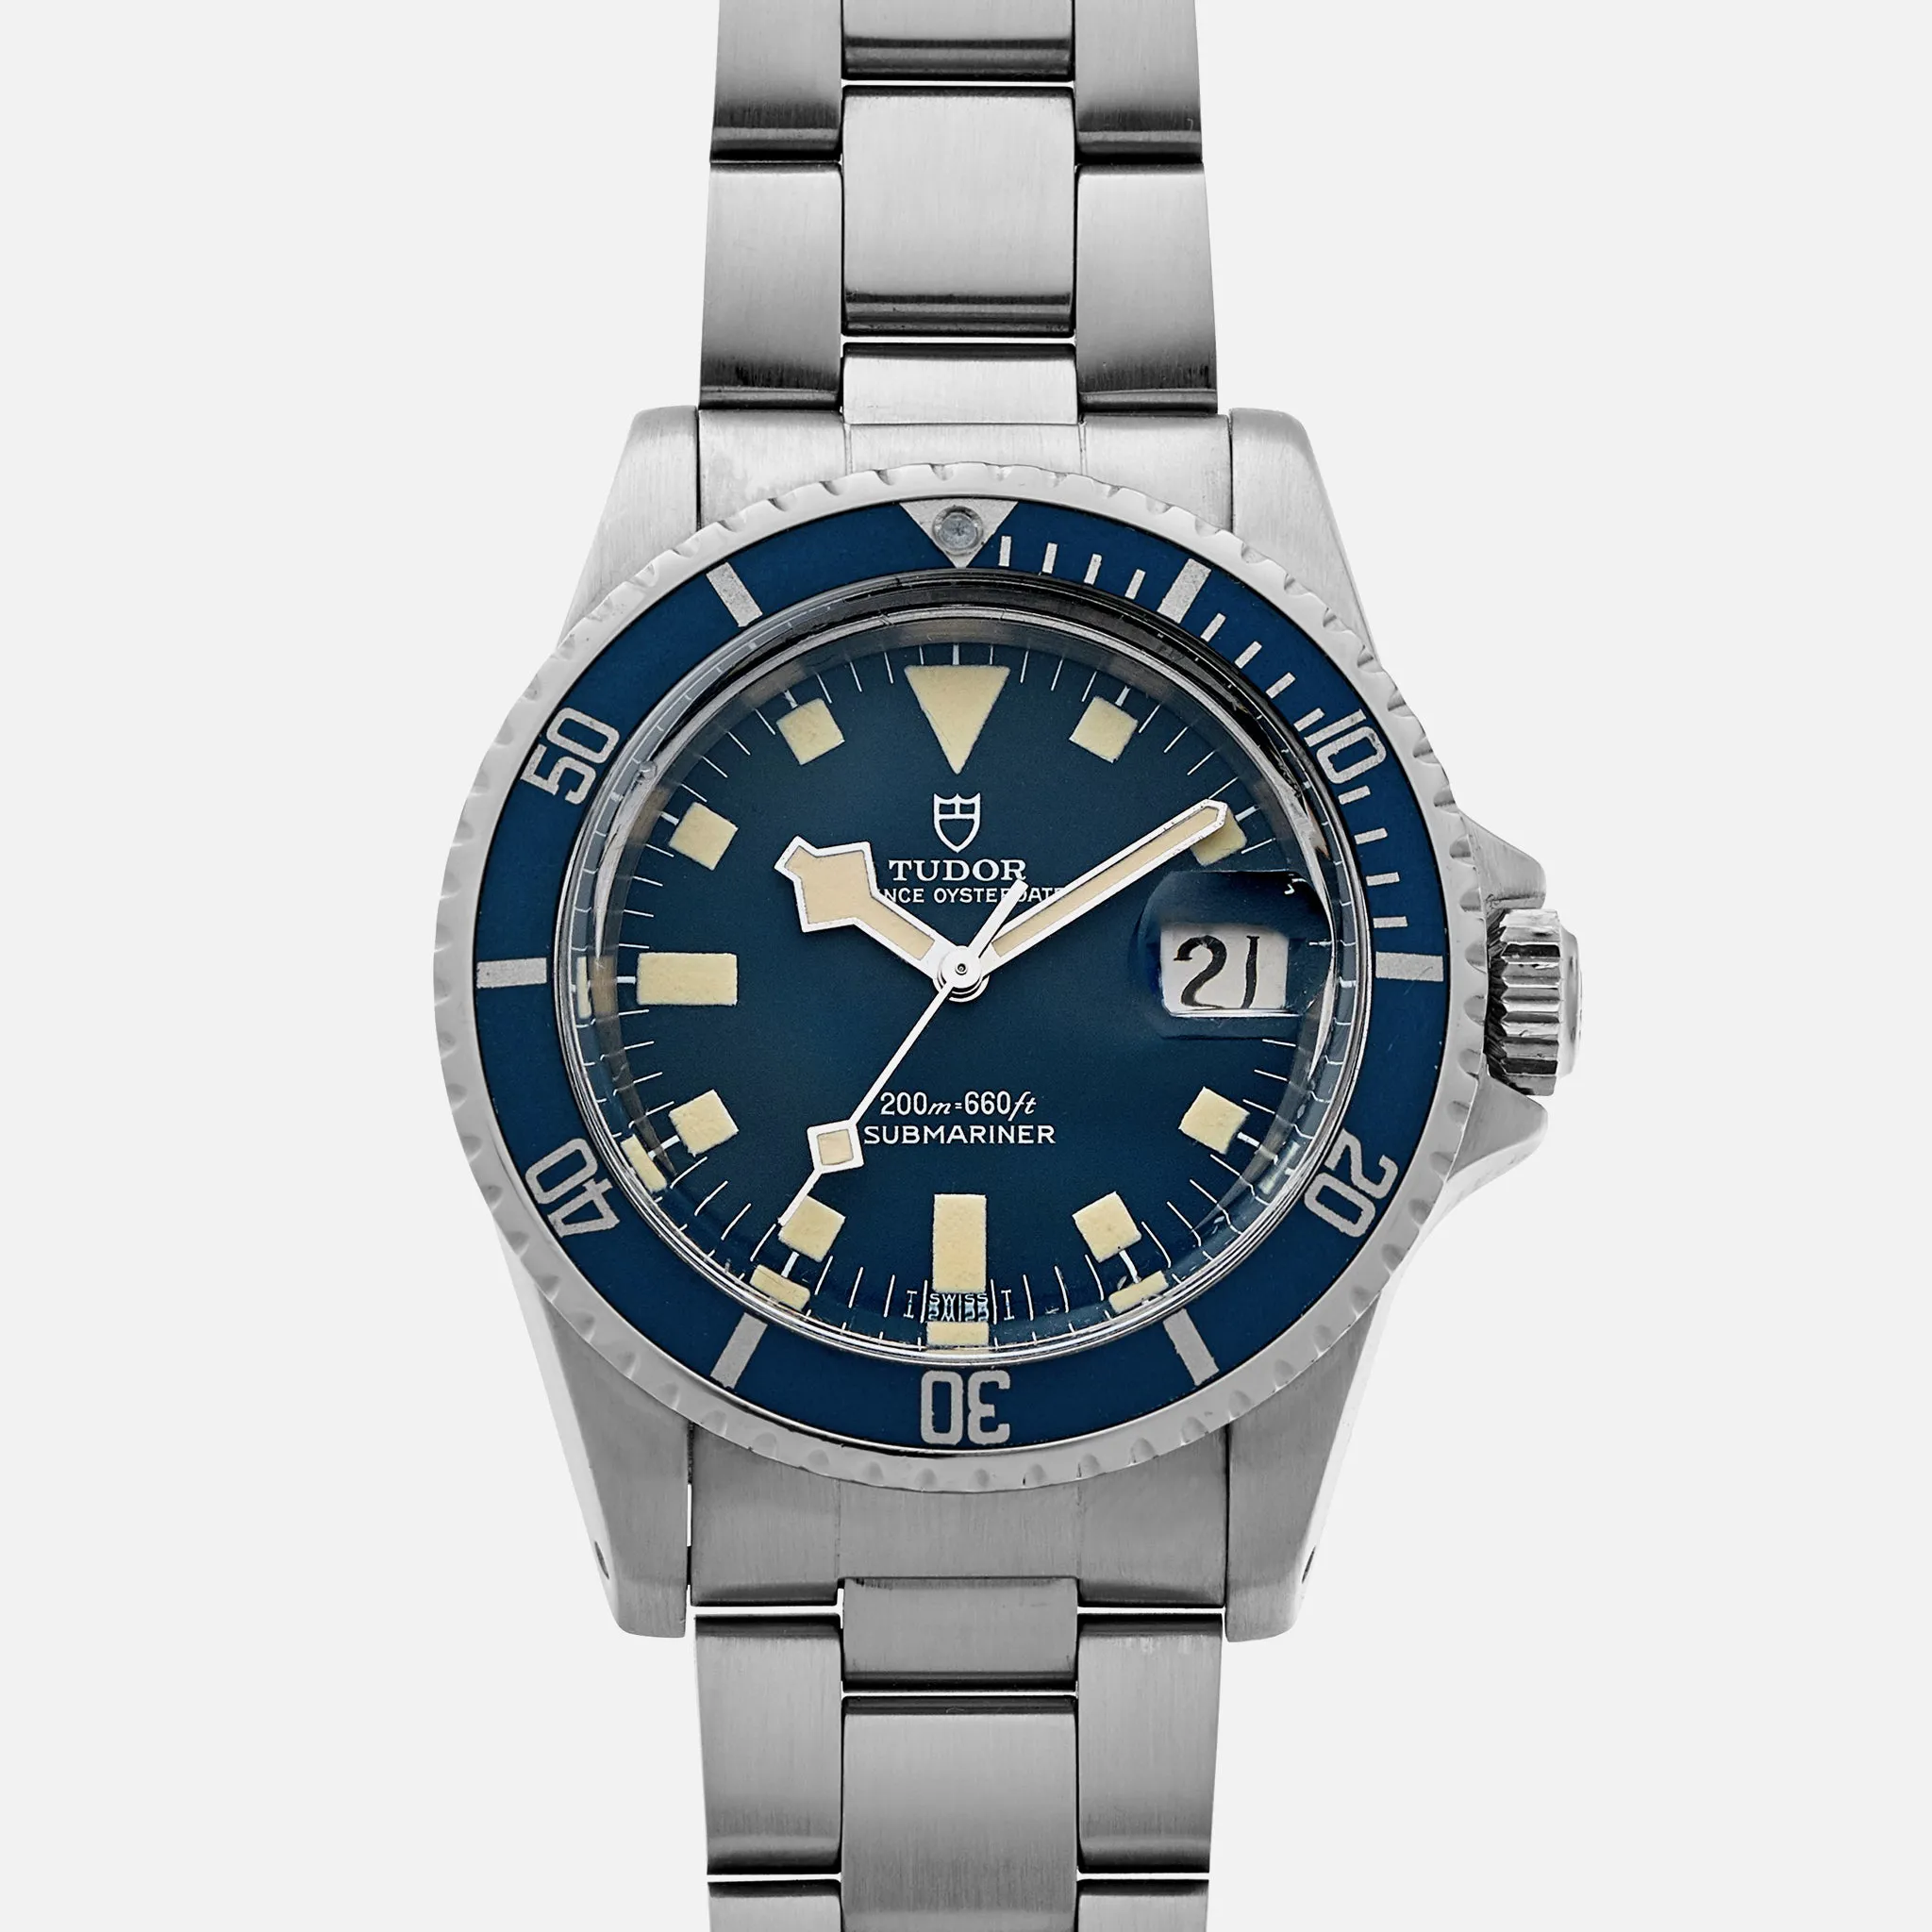 Tudor Prince Oysterdate Submariner 9411/0 39mm Stainless steel Blue